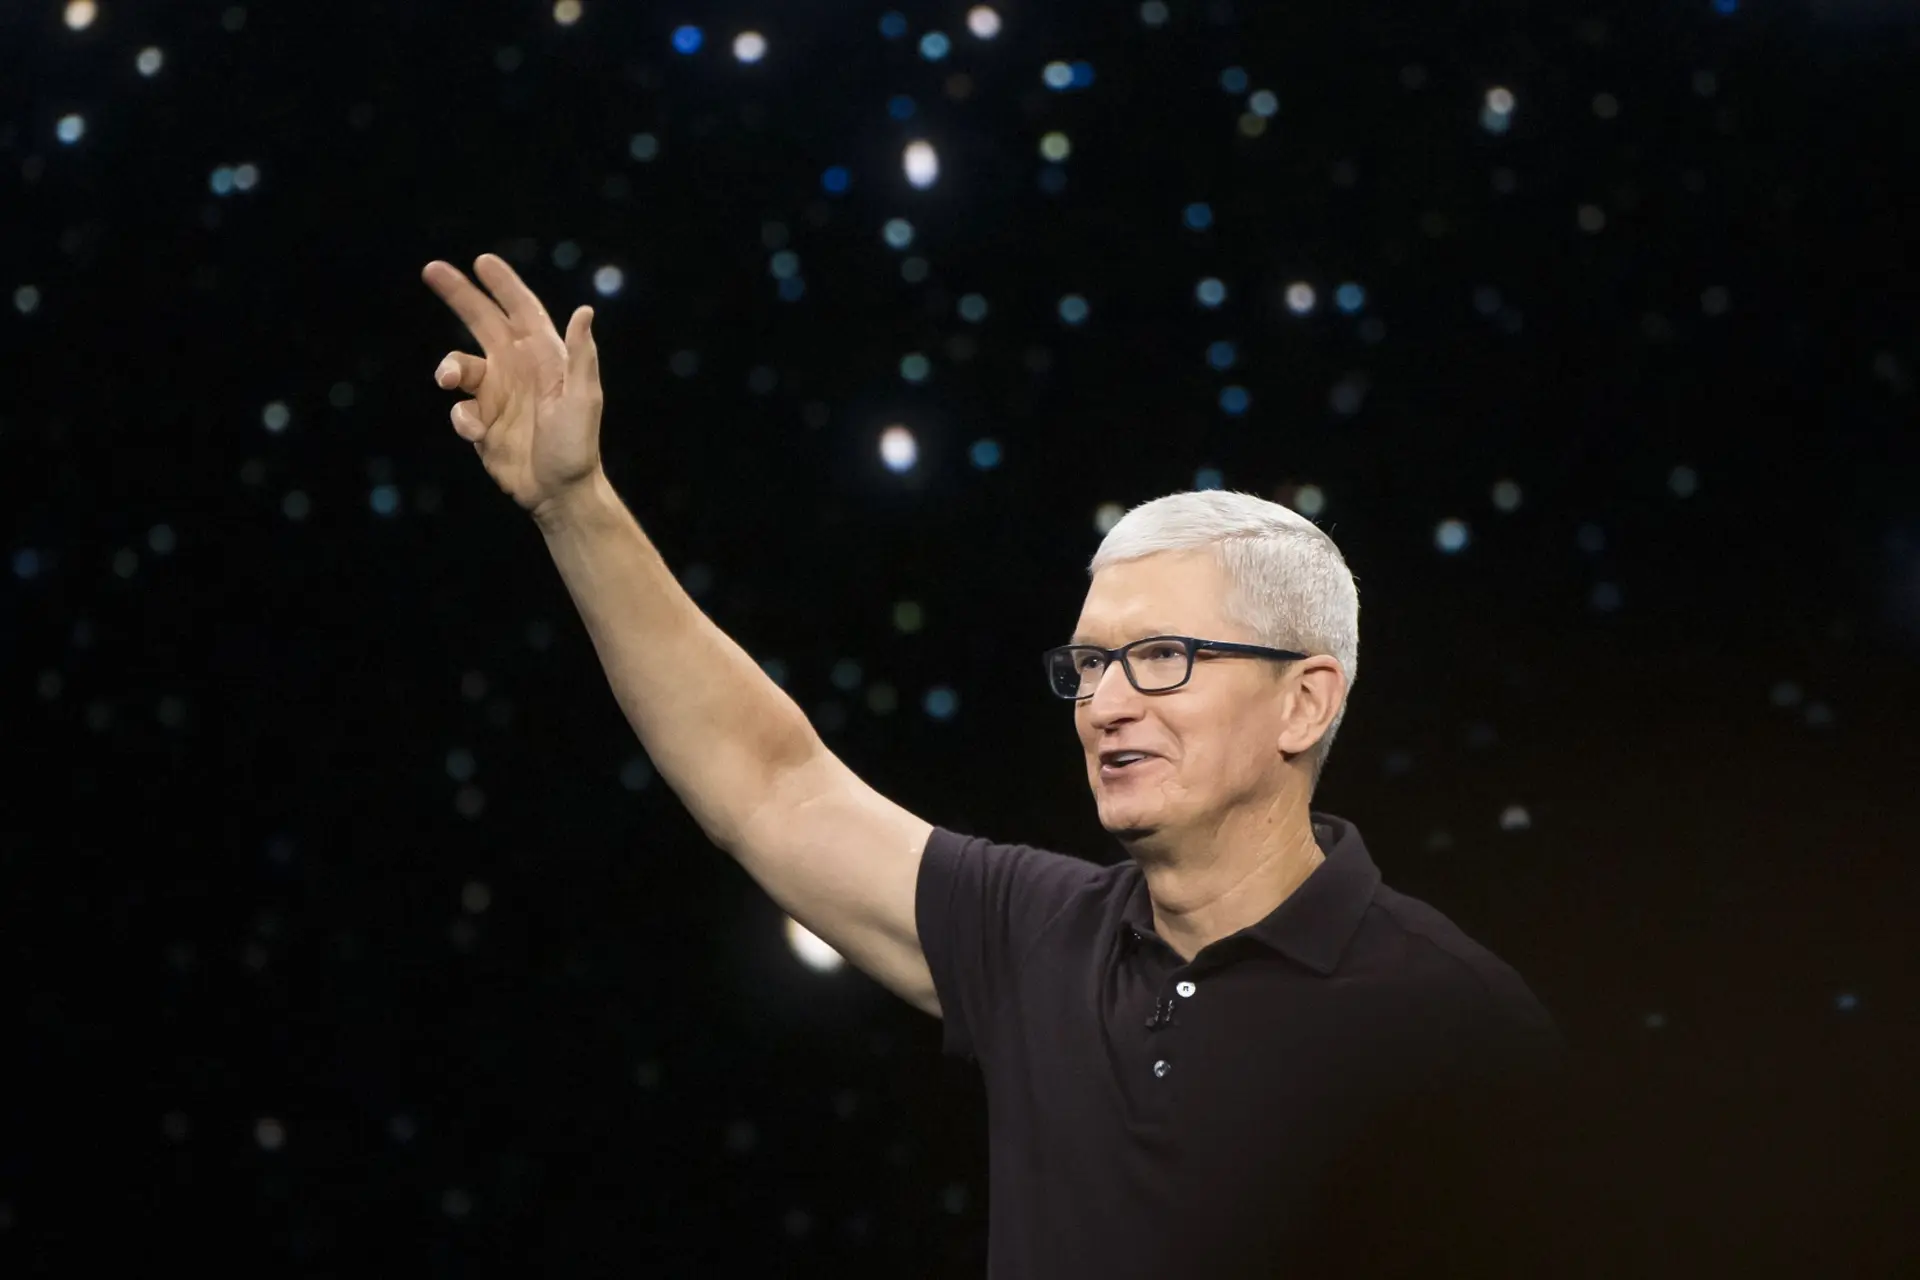 Tim Cook, CEO of Apple, happy with his hands up